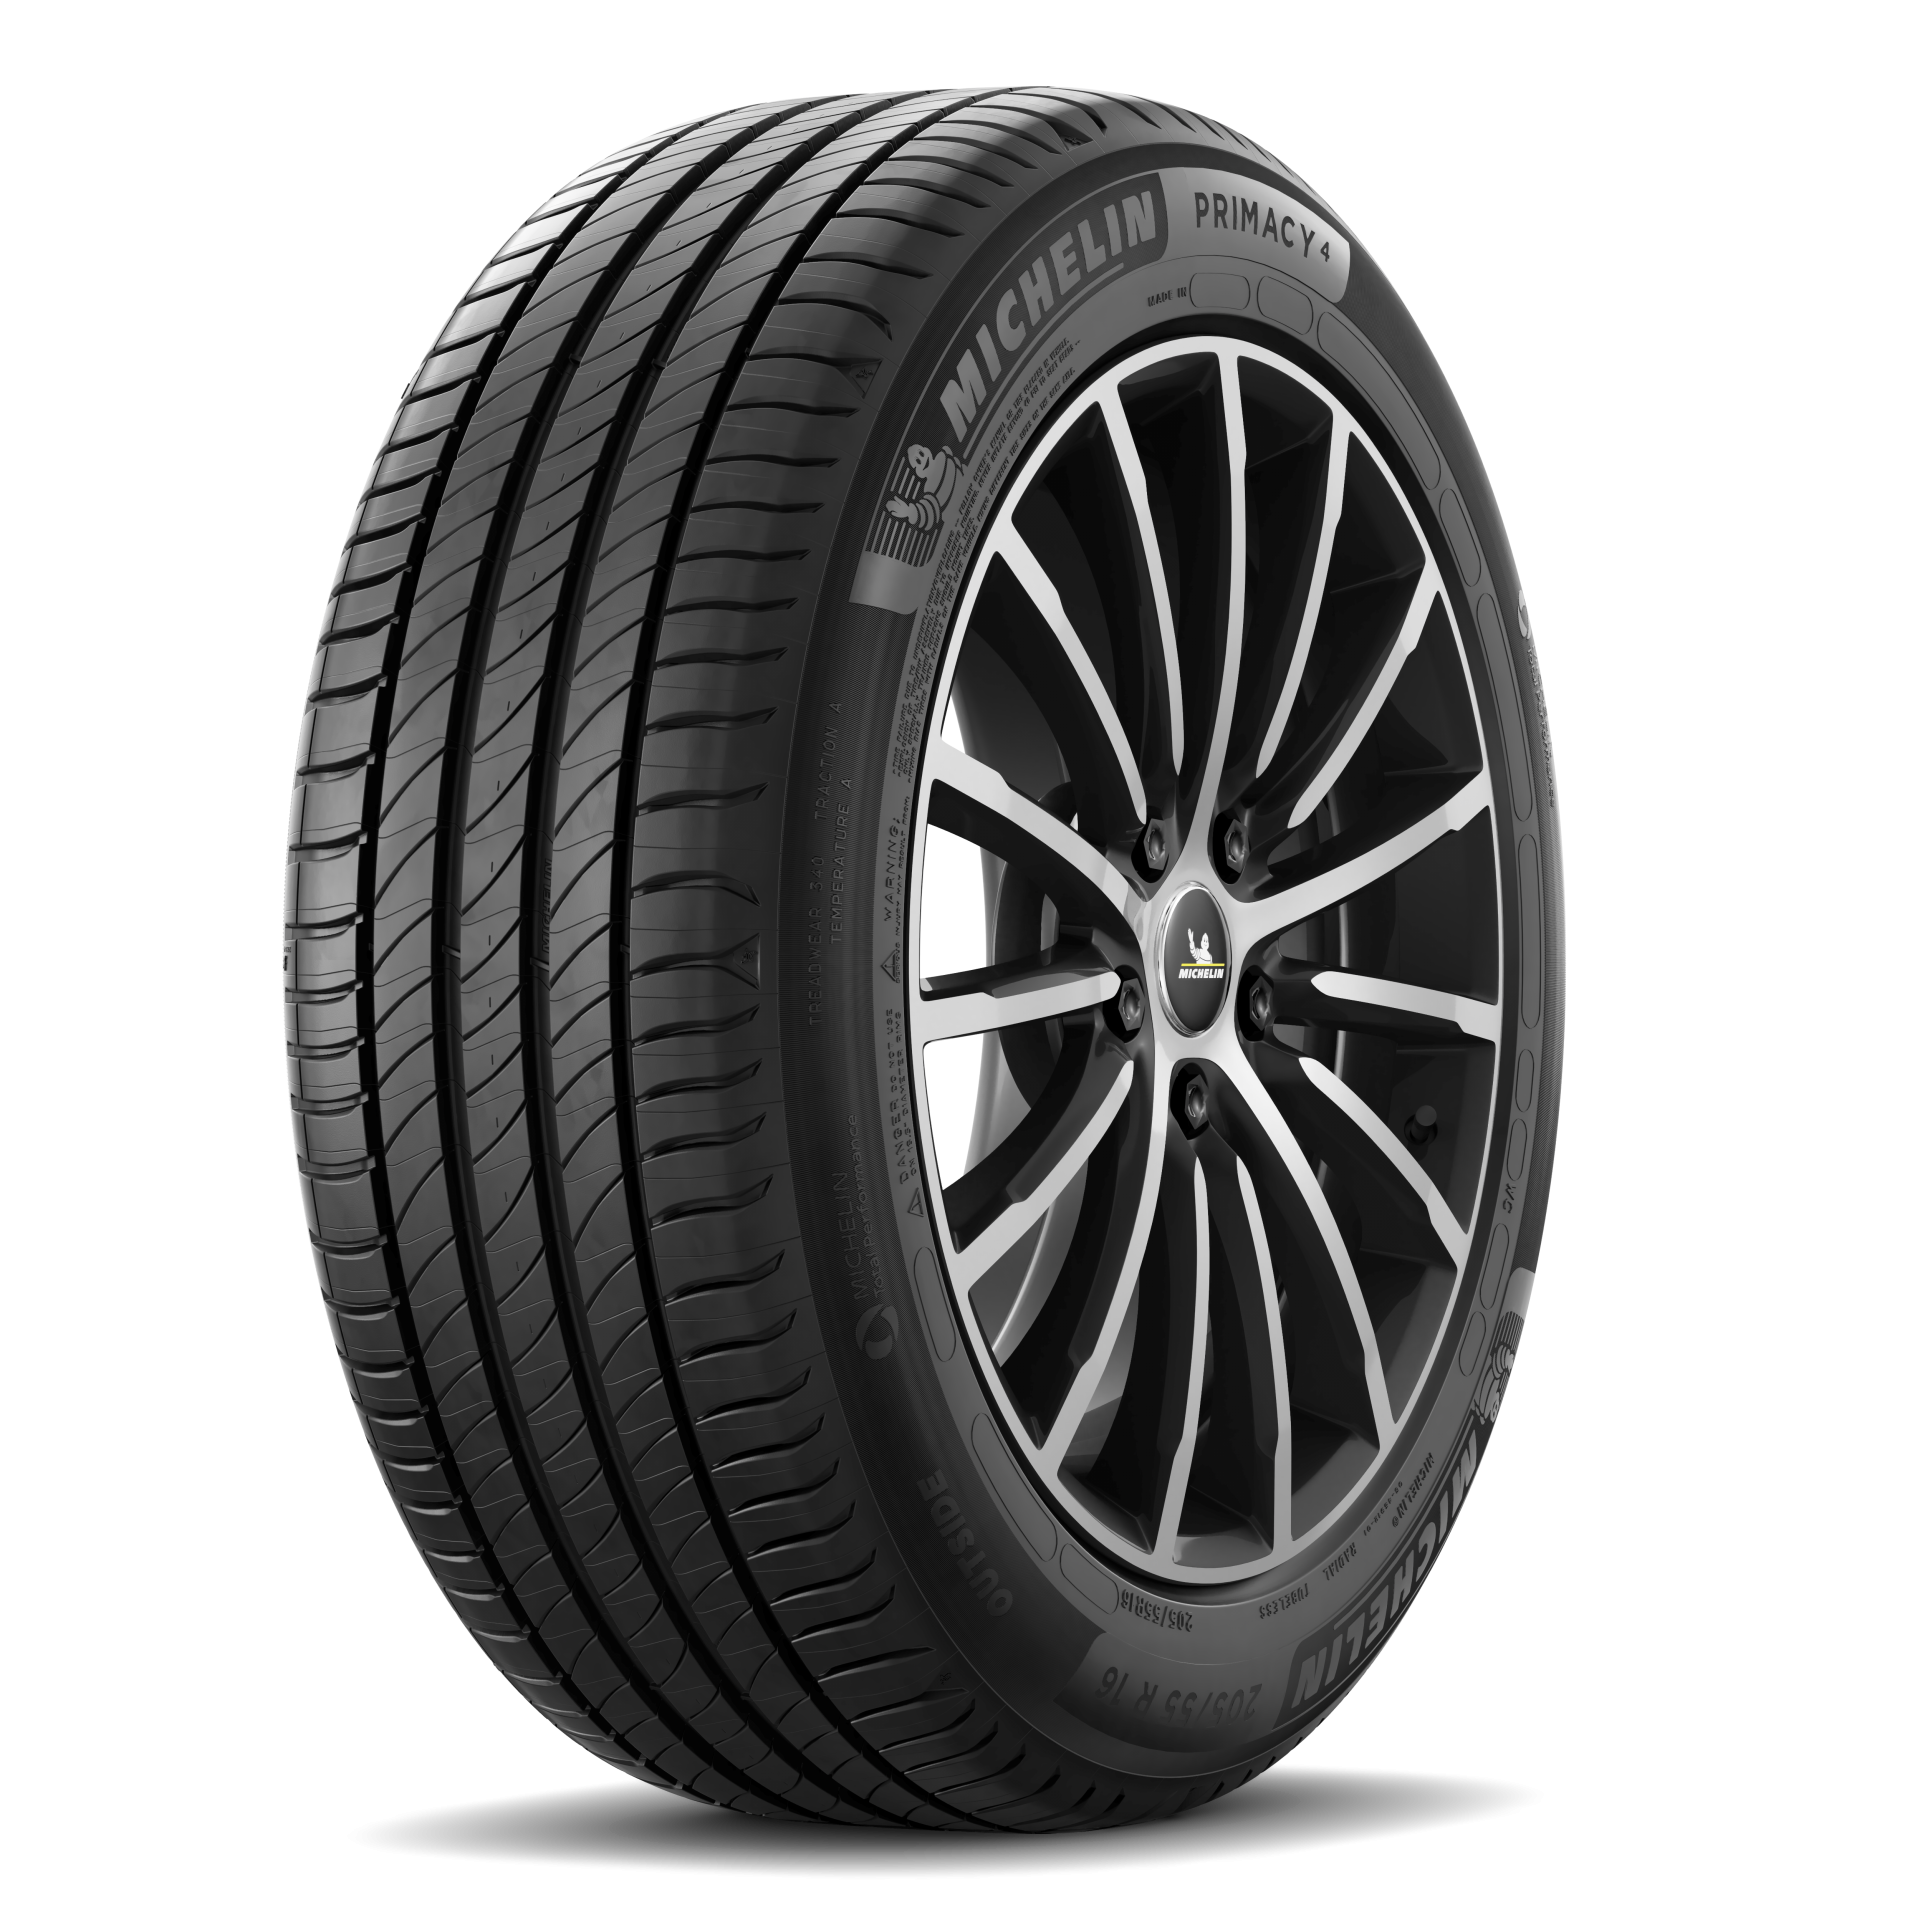 215/60R17 Size Tires: choose the best for your car